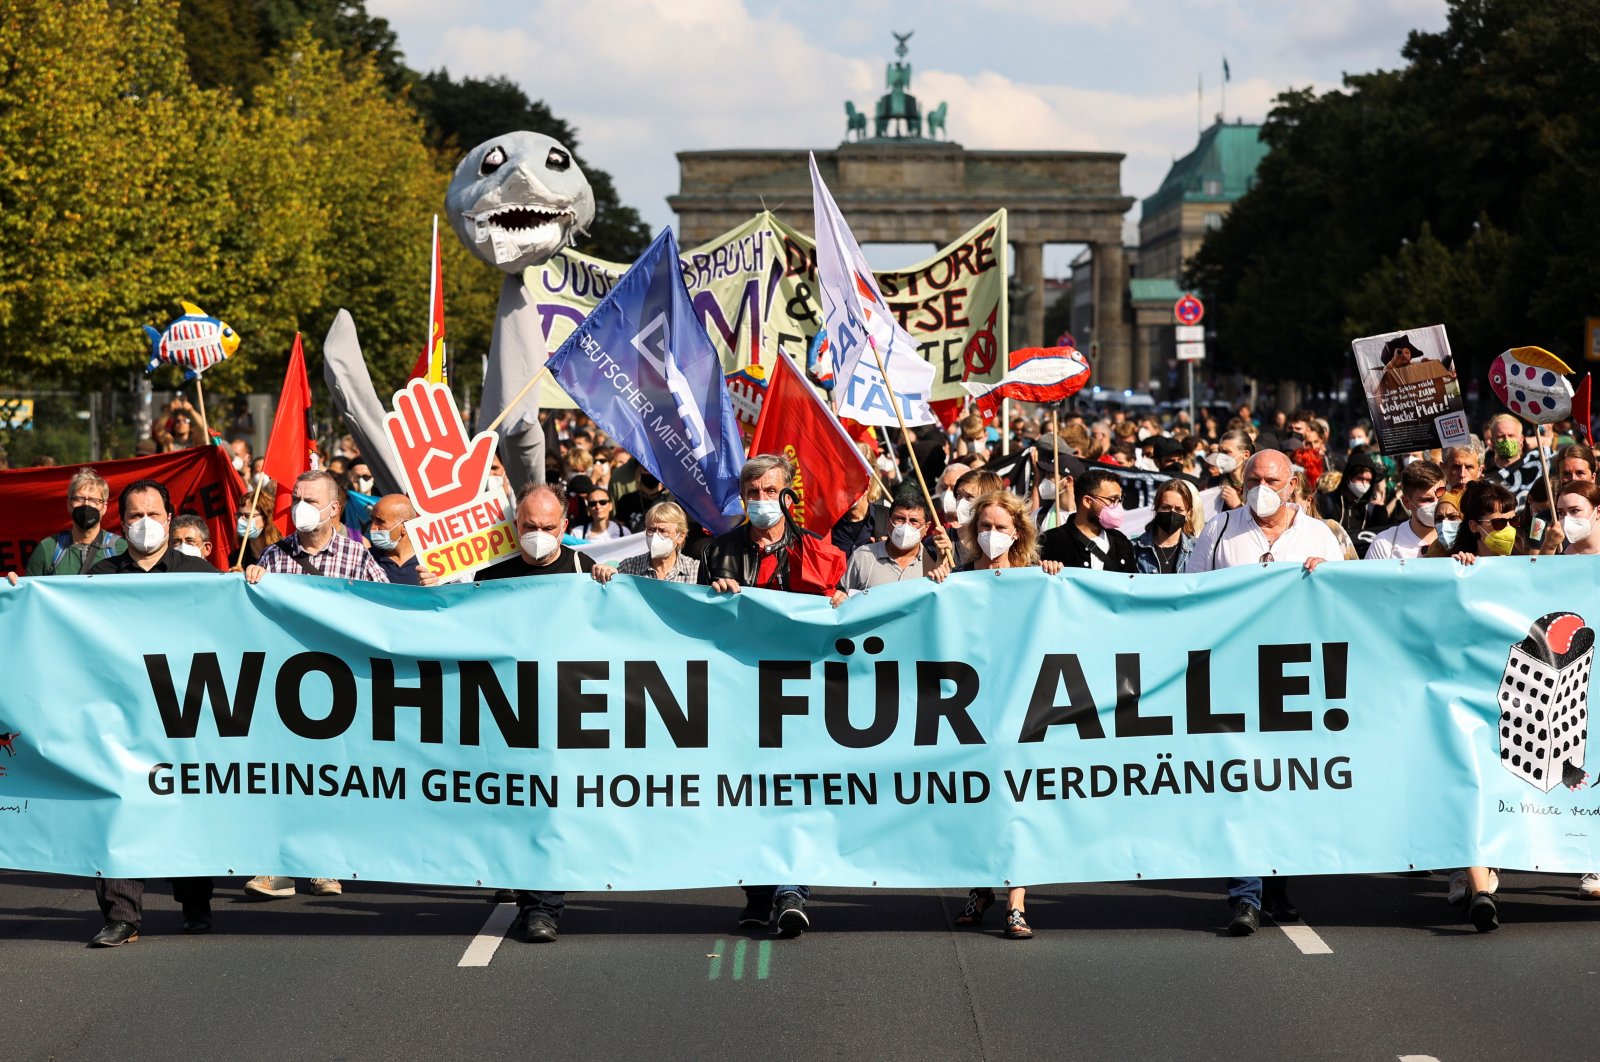 Protesters carry a banner reading "Housing for all" during a demonstration against rising rental costs for flats in Berlin, Germany, Sept. 11, 2021. (Reuters Photo)